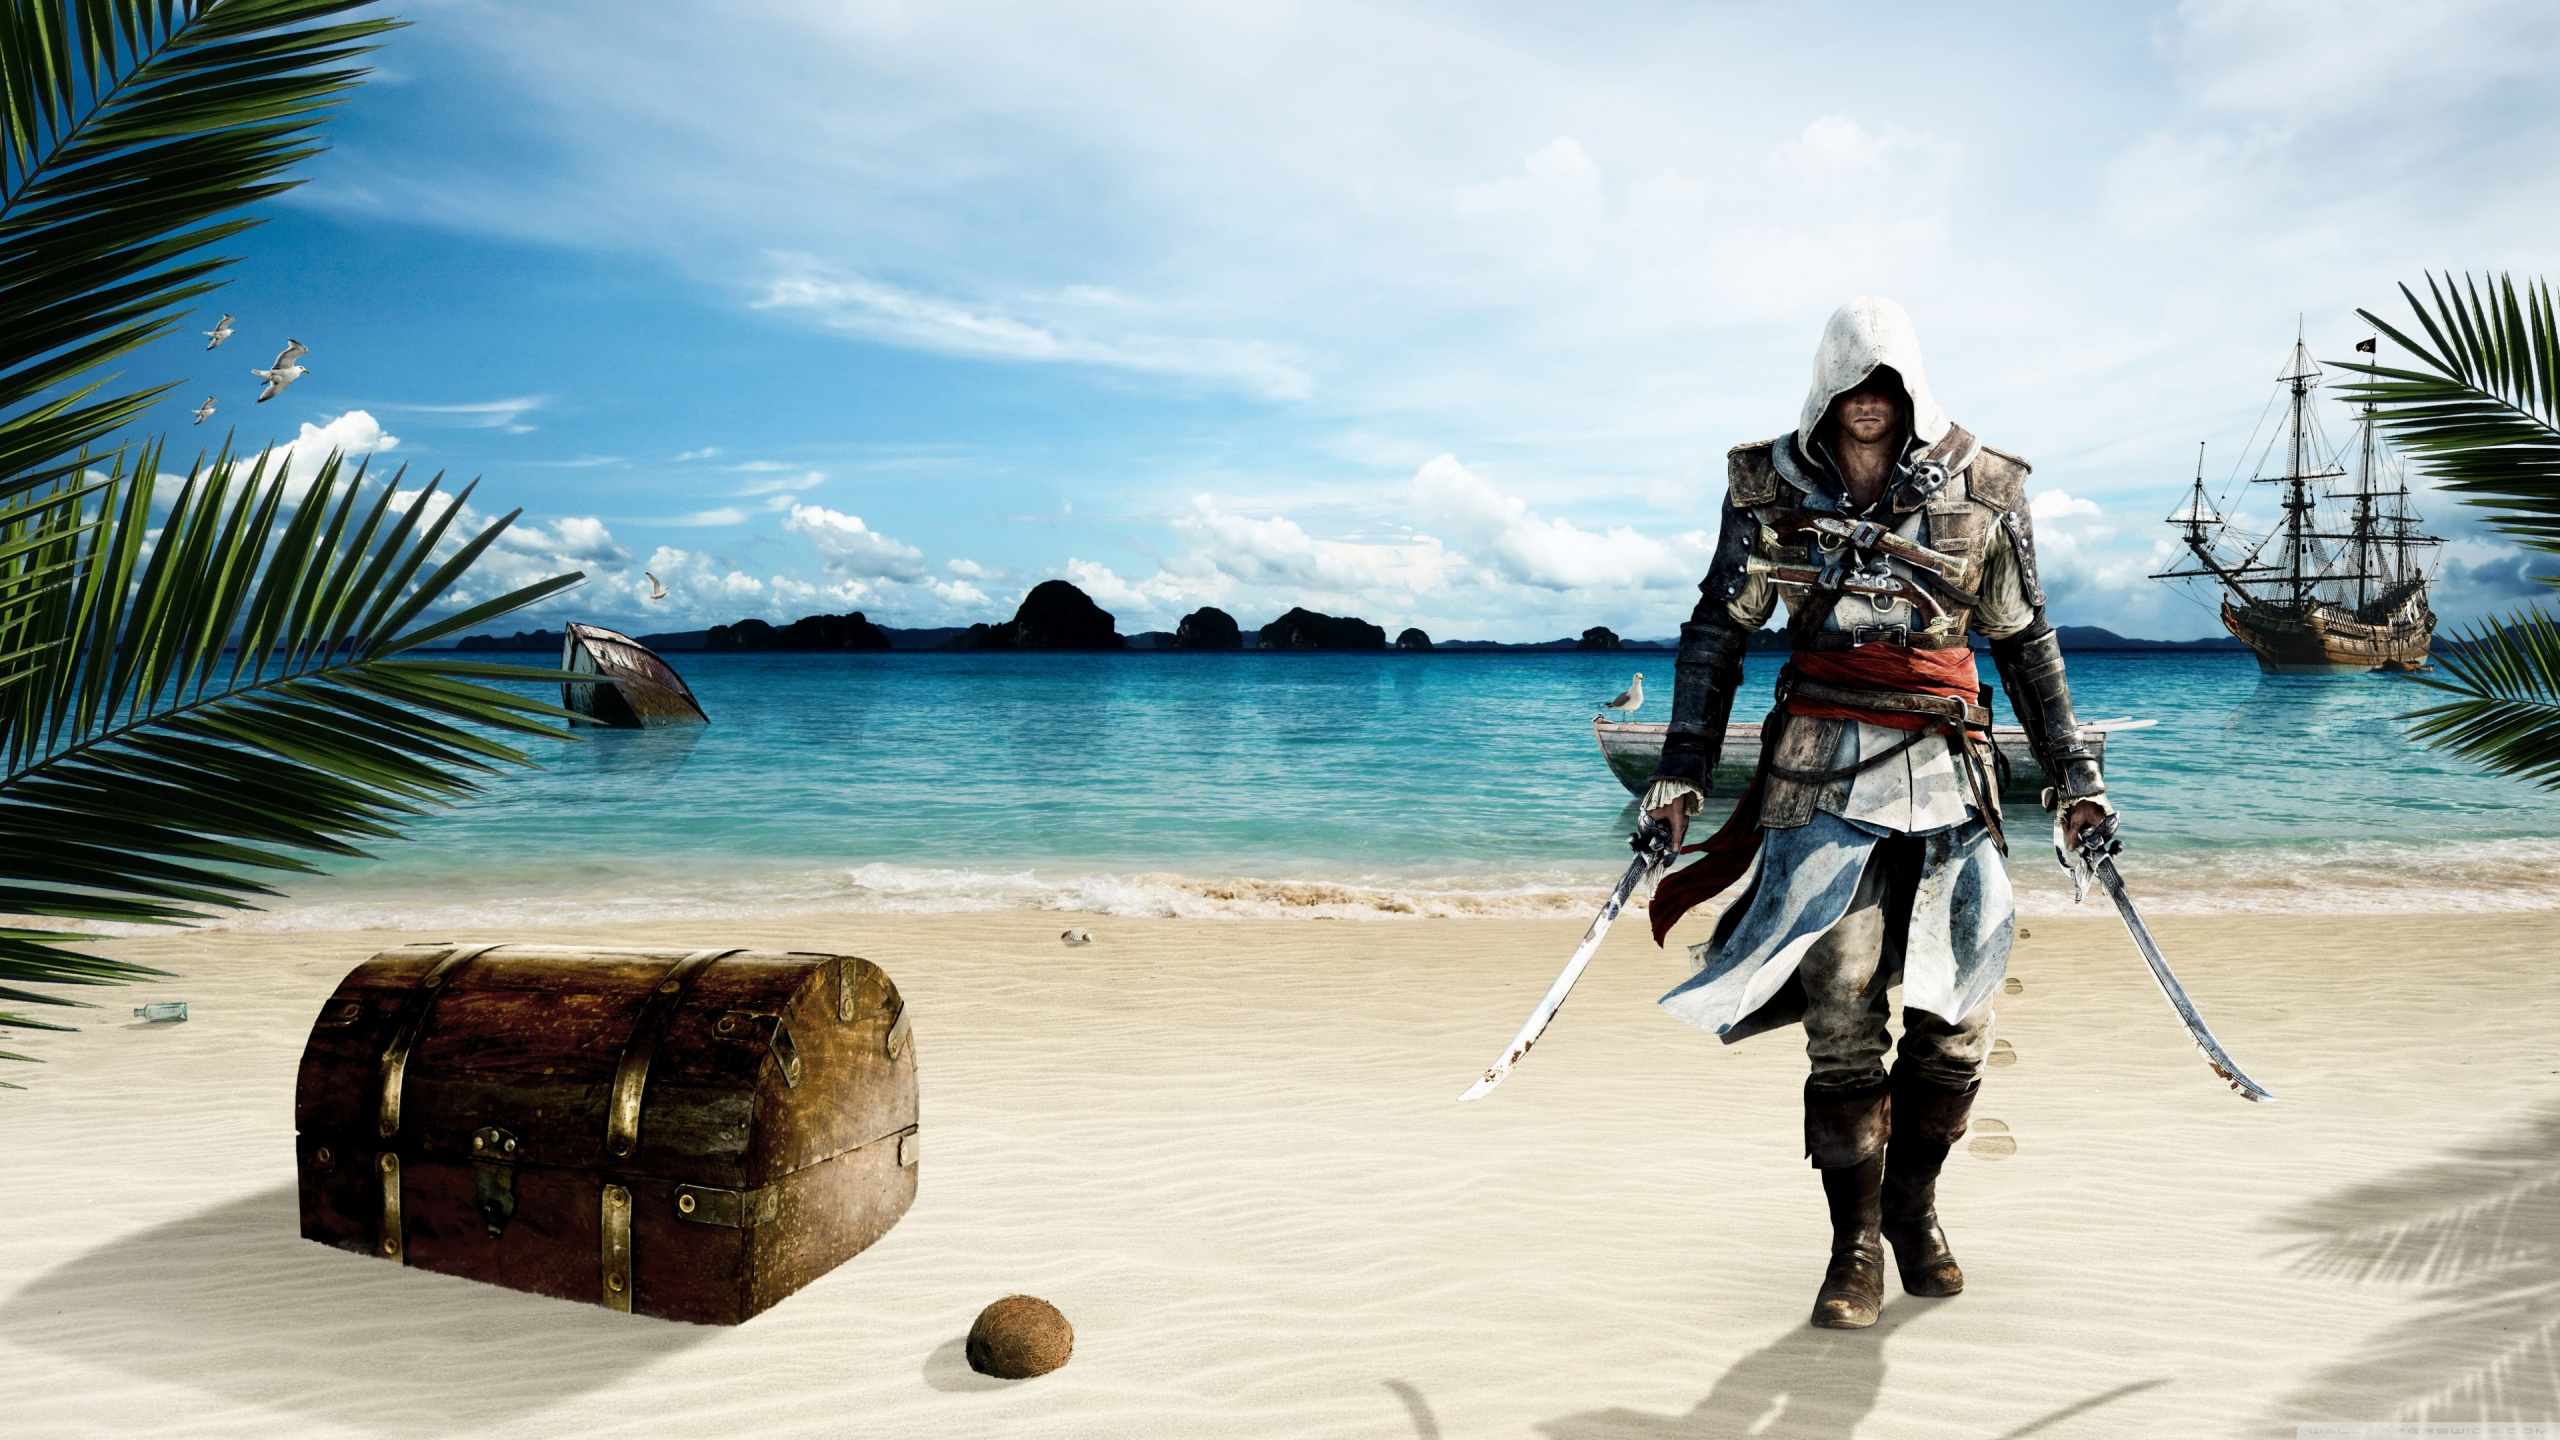 Tourisme, Mer, Vacances, Voyage, Assassins Creed III. Wallpaper in 2560x1440 Resolution